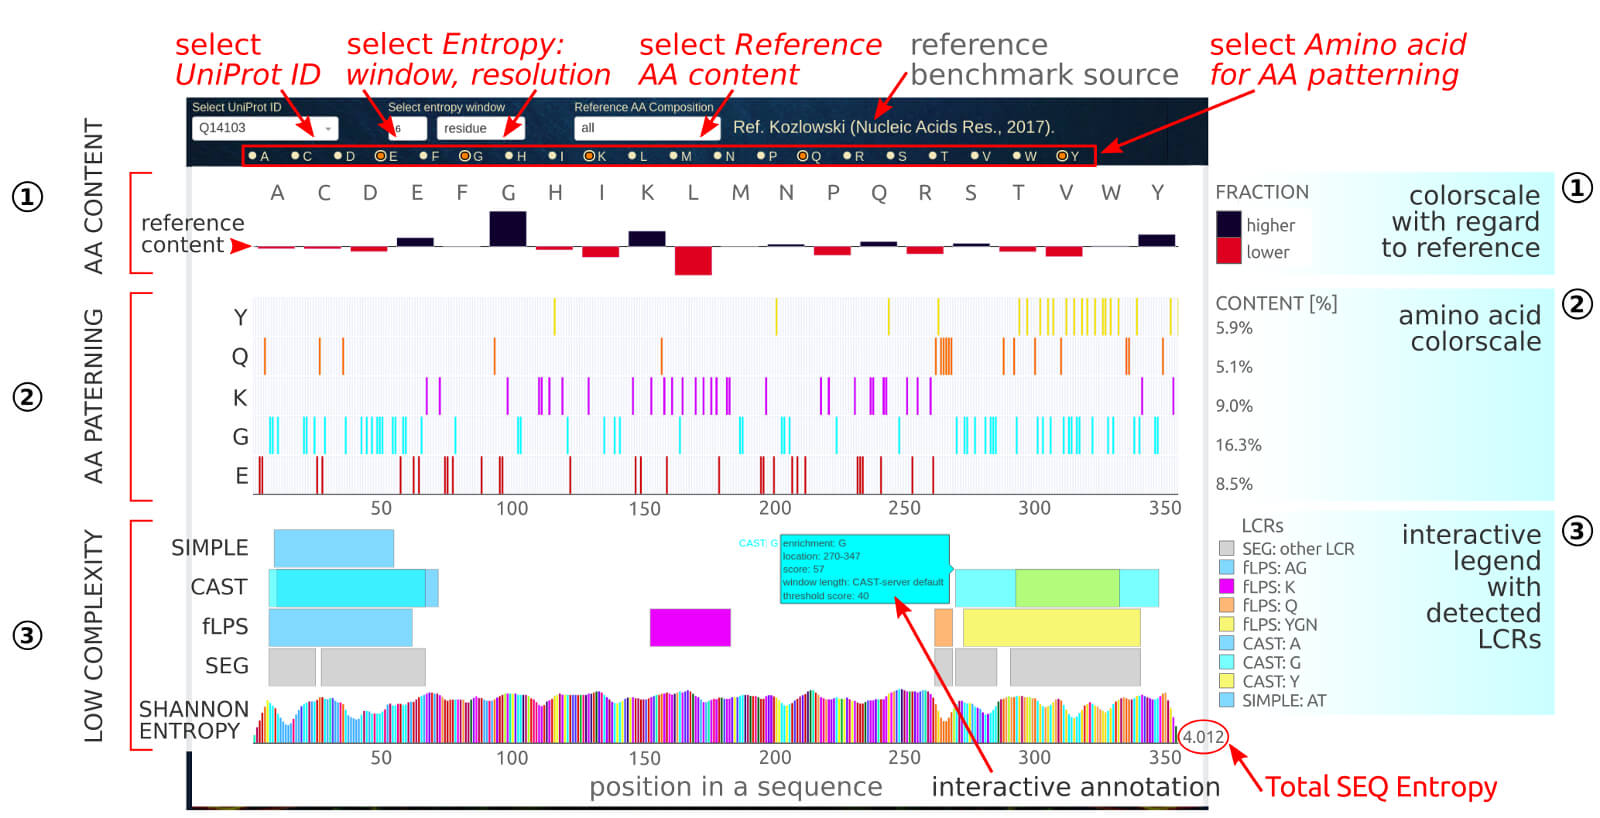 BIAPSS - Explore amino acid composition and low-complexity of single LLPS sequence.